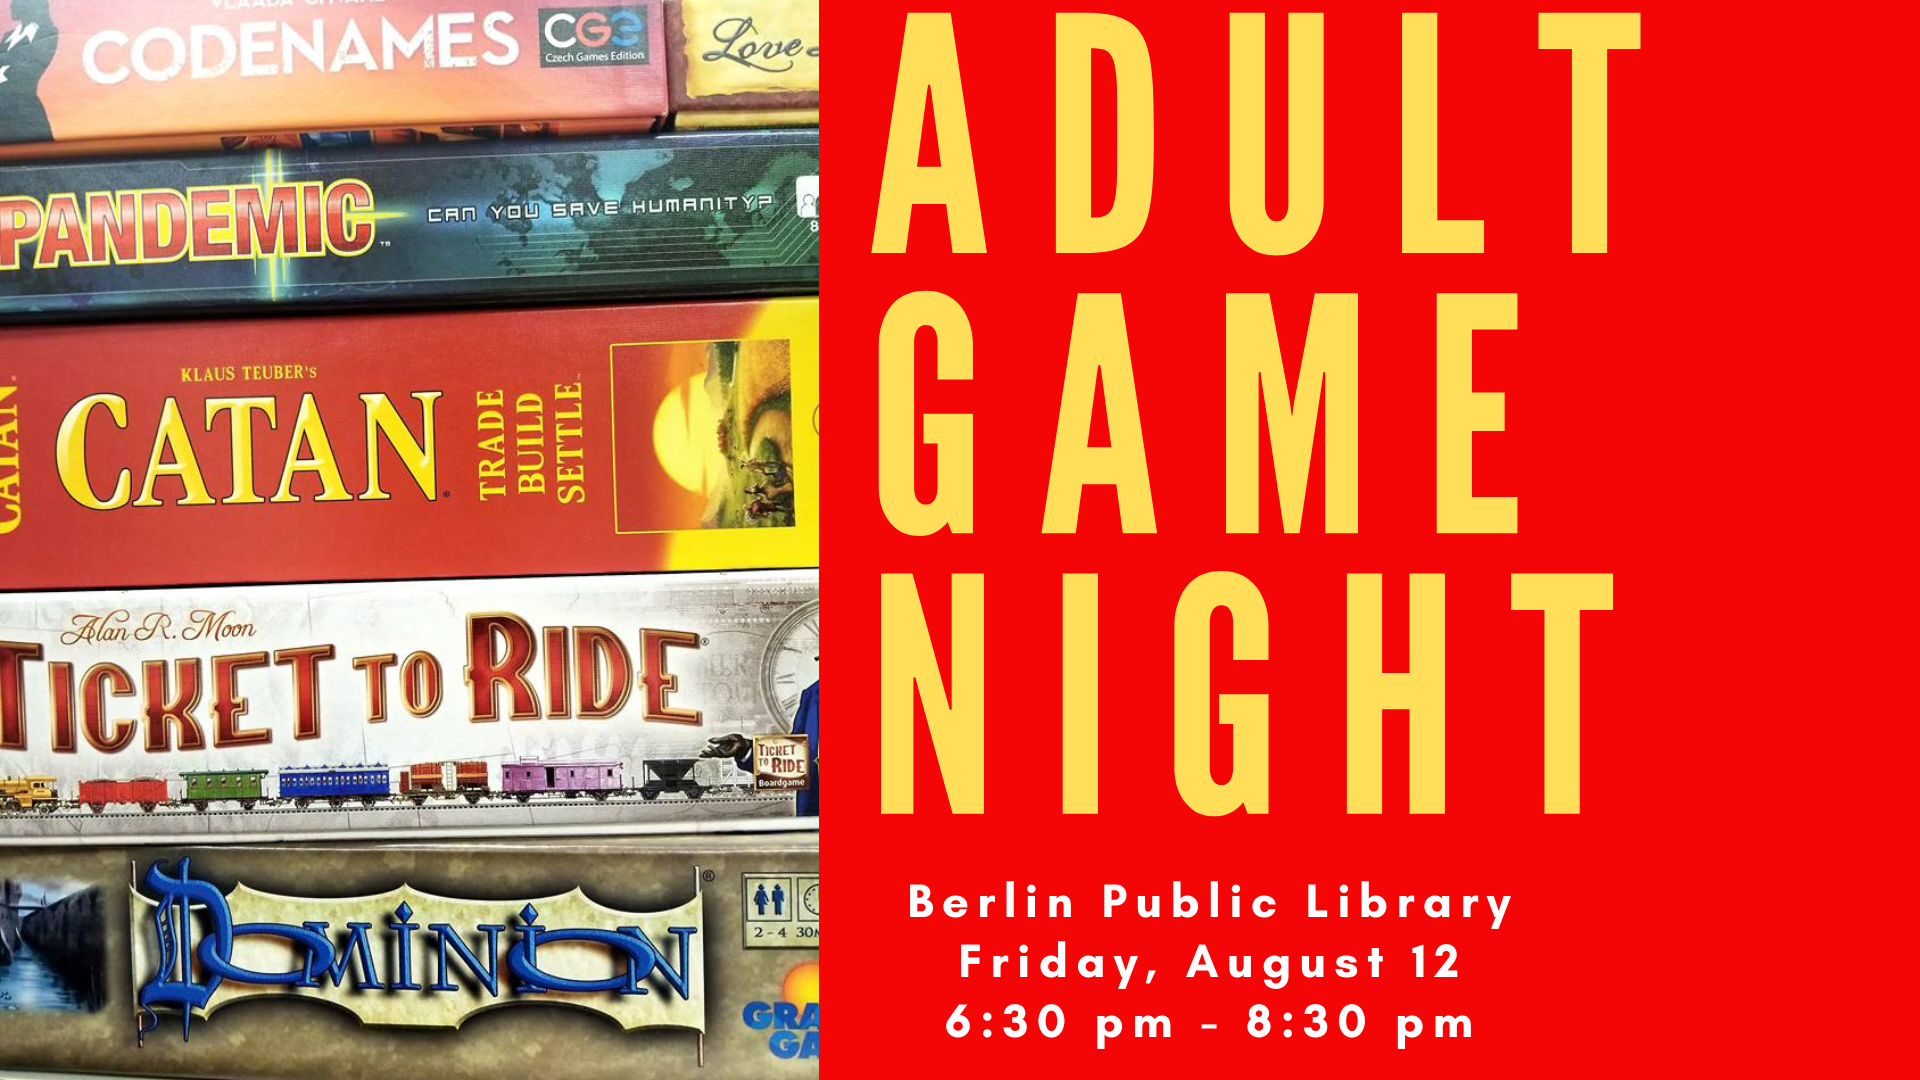 Adult Game Night. Berlin Public Library. Friday, August 12, 6:30-8:30